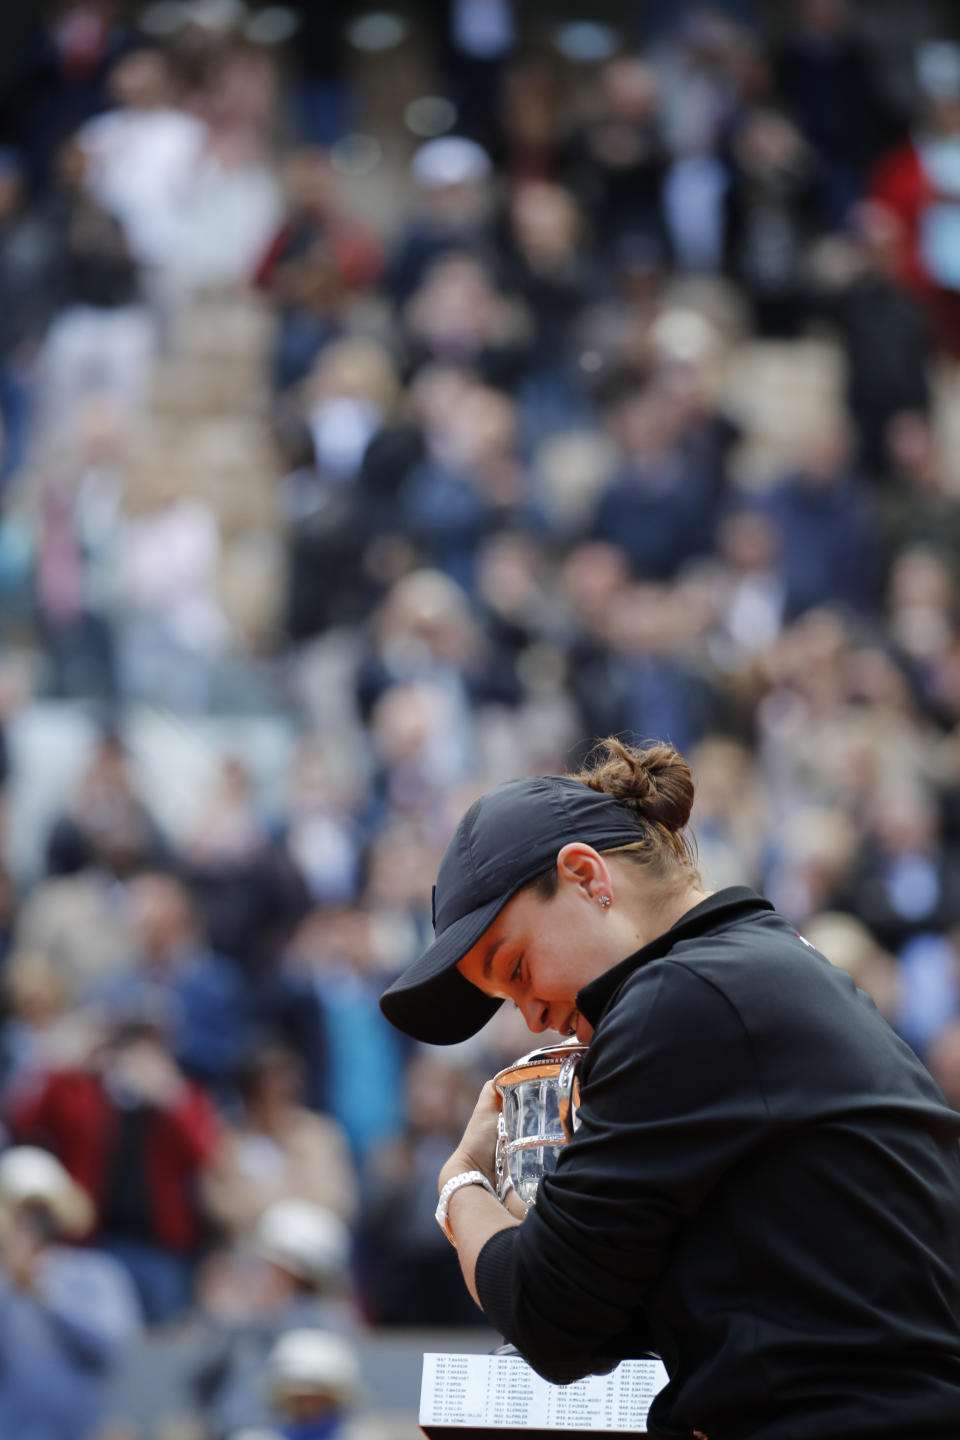 Australia's Ashleigh Barty hugs the trophy as she celebrates winning her women's final match of the French Open tennis tournament against Marketa Vondrousova of the Czech Republic in two sets 6-1, 6-3, at the Roland Garros stadium in Paris, Saturday, June 8, 2019. (AP Photo/Christophe Ena)